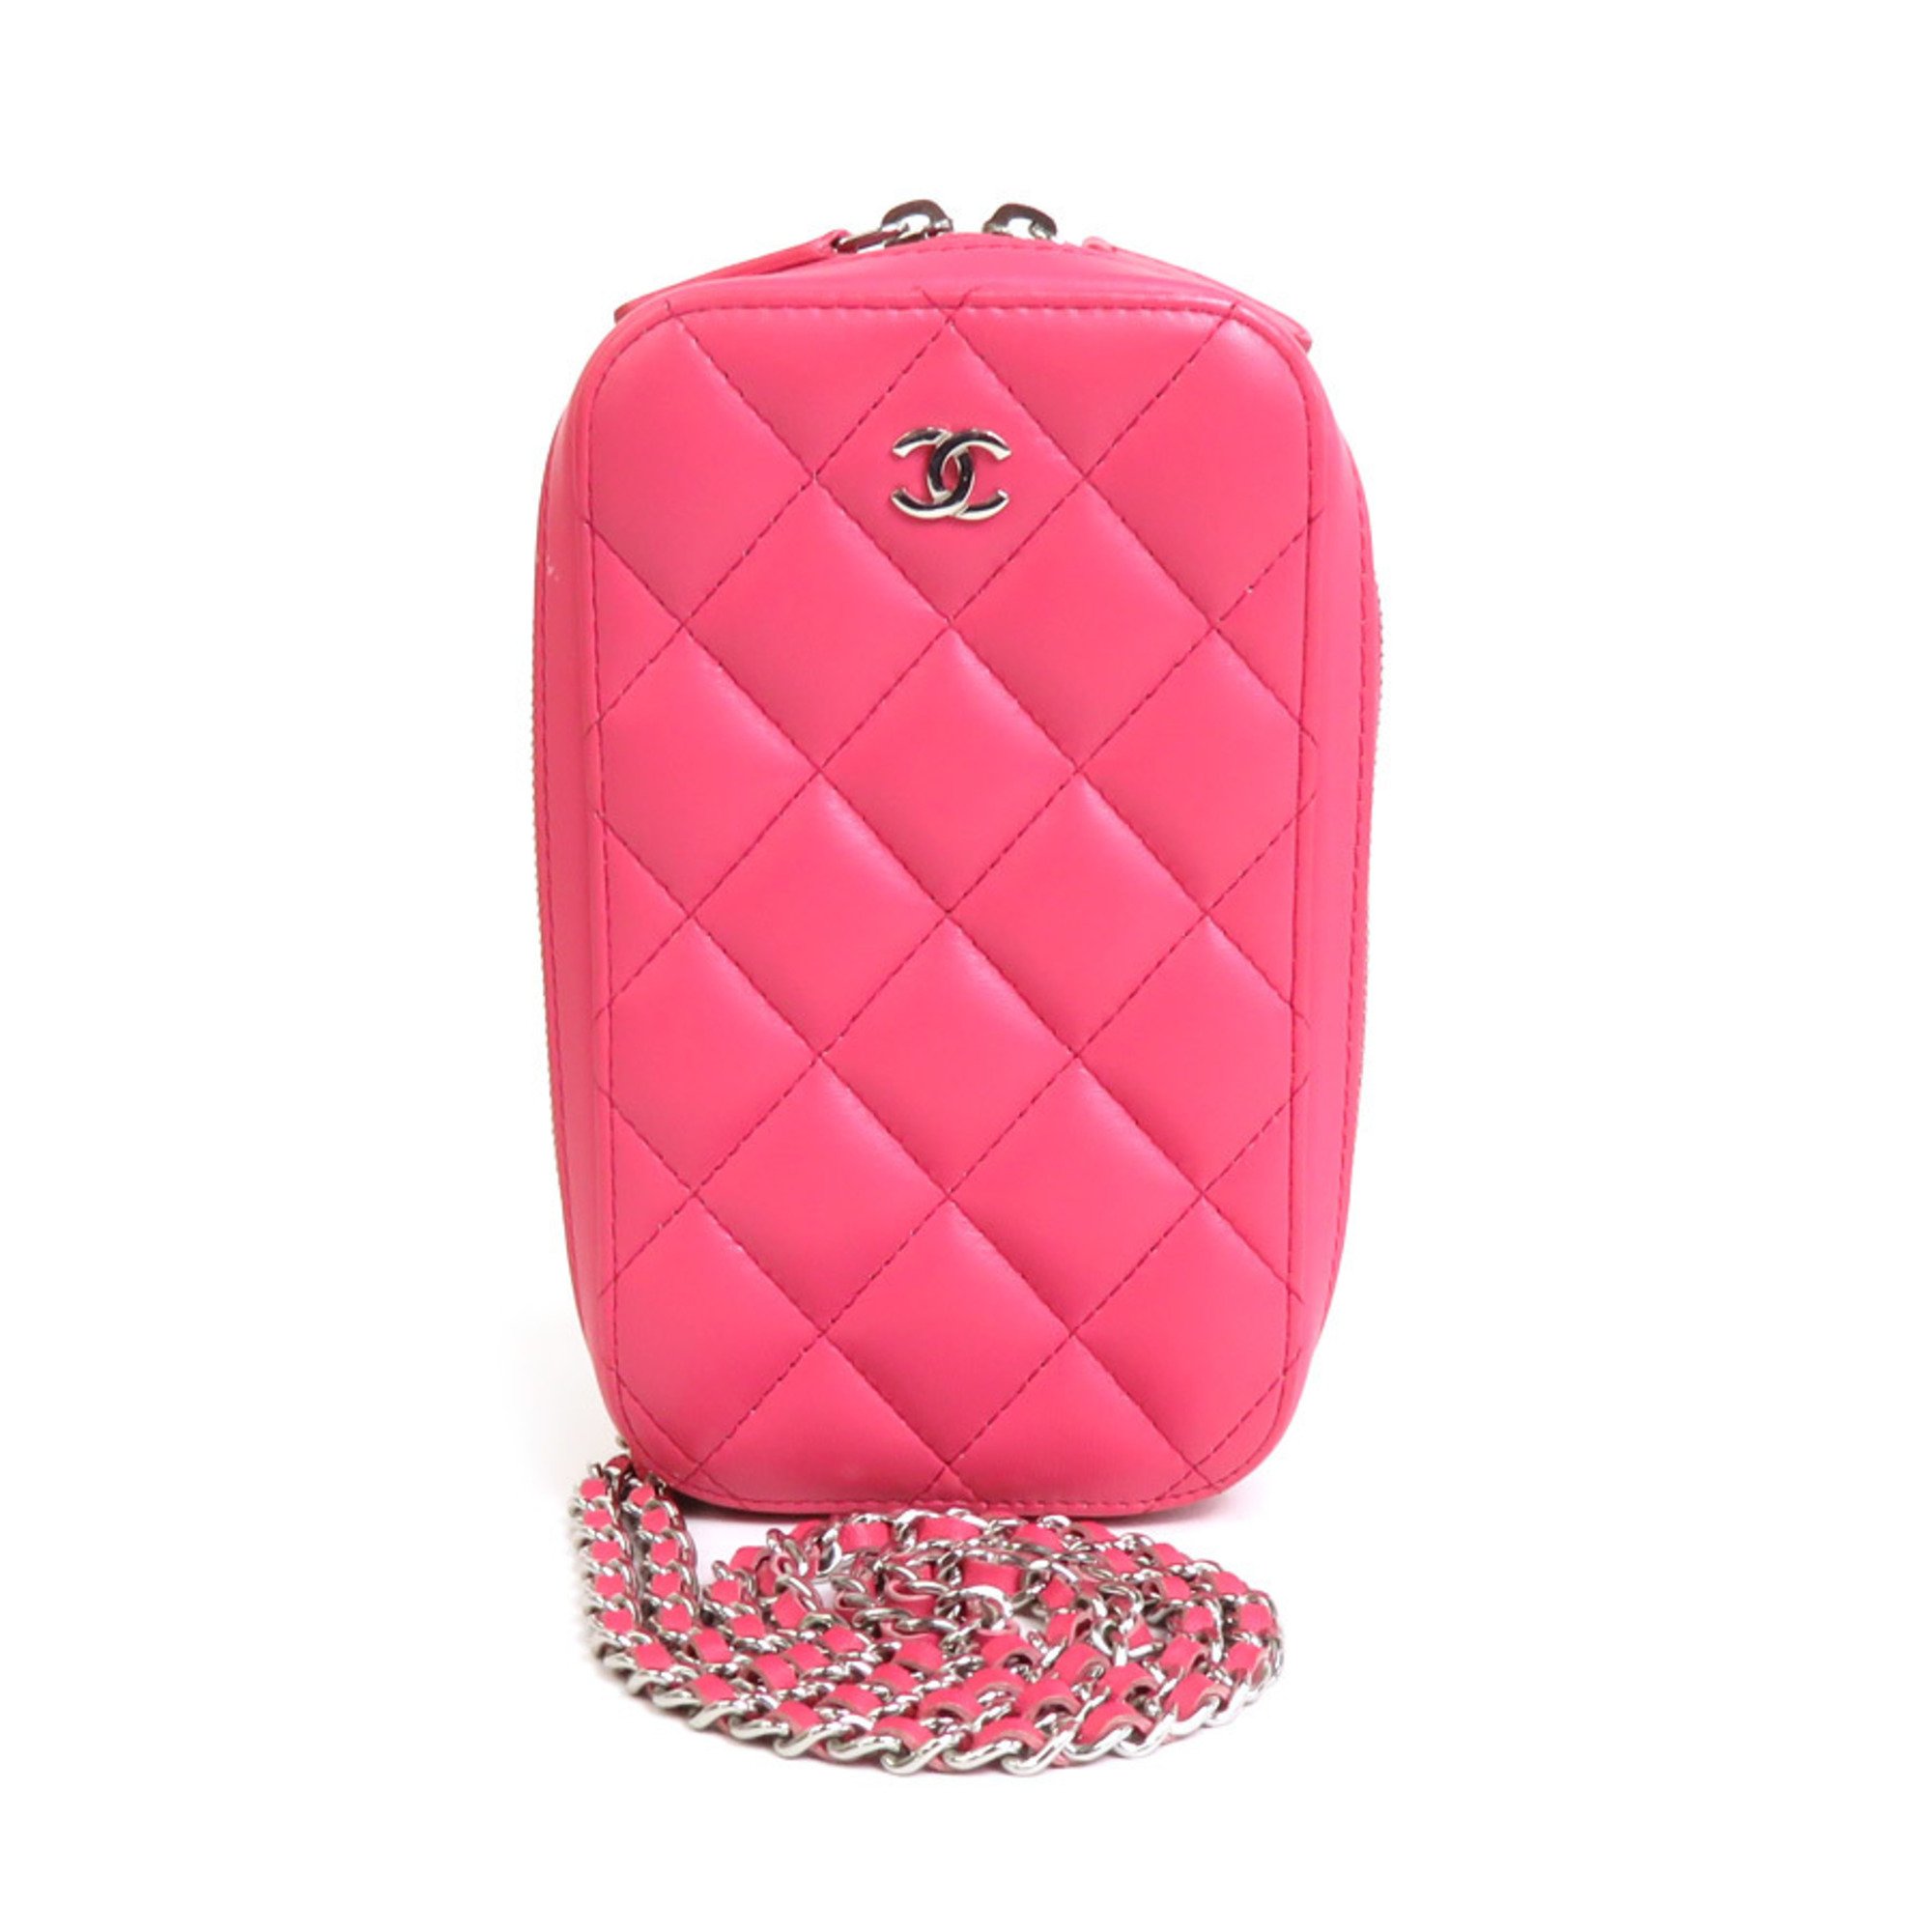 CHANEL Smartphone Case Chain Phone Pouch Crossbody Shoulder Bag Matelasse Leather/Metal Pink/Silver Women's